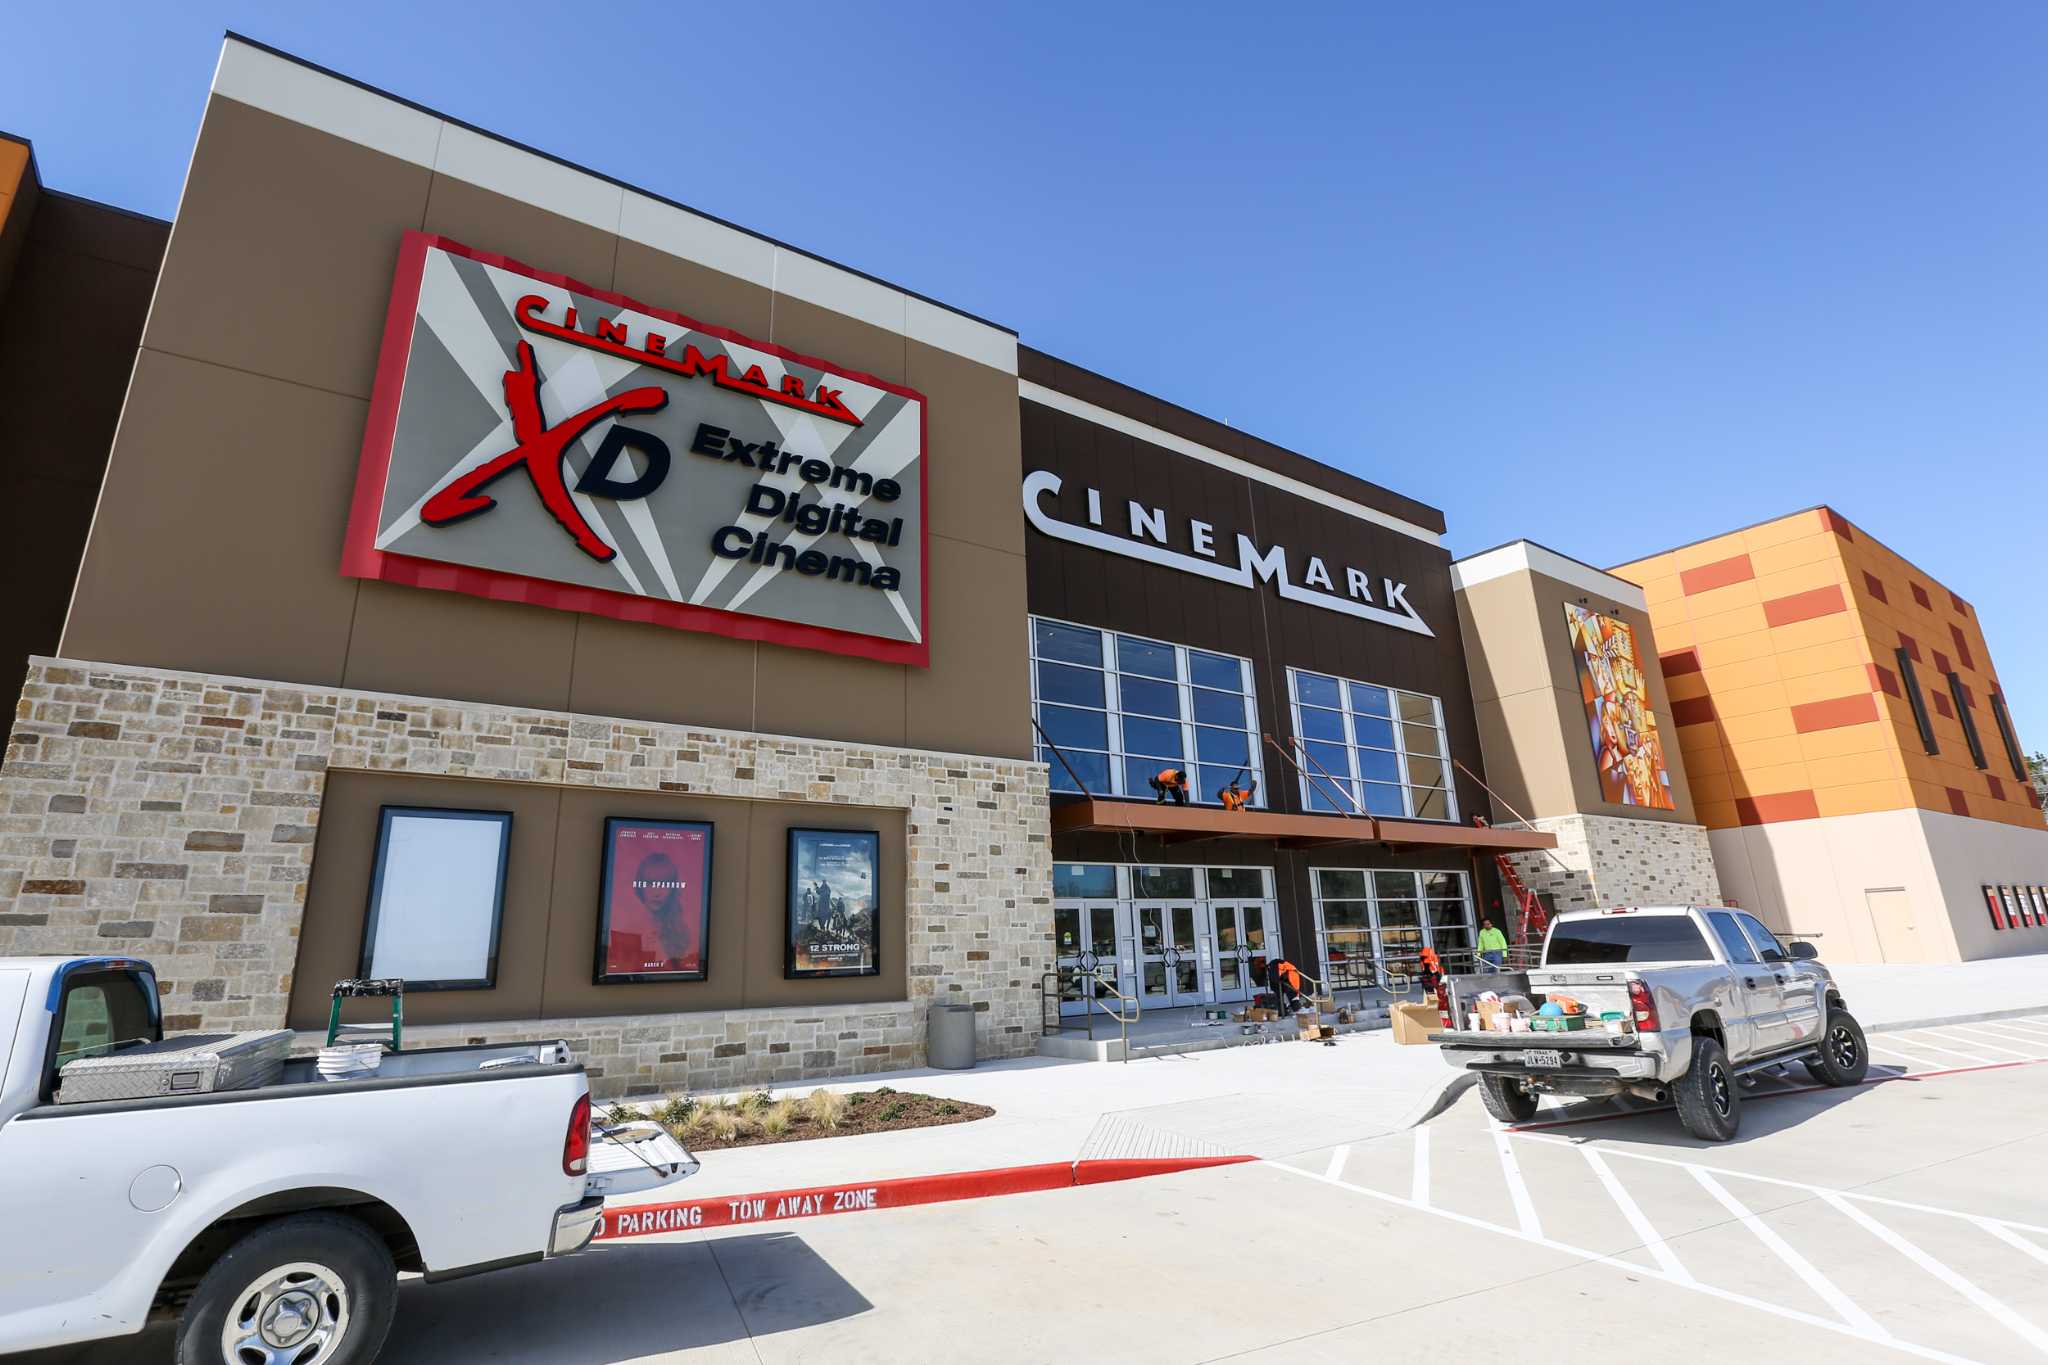 Cinemark to institute ban on large bags in movie theaters for 'safety and security ...